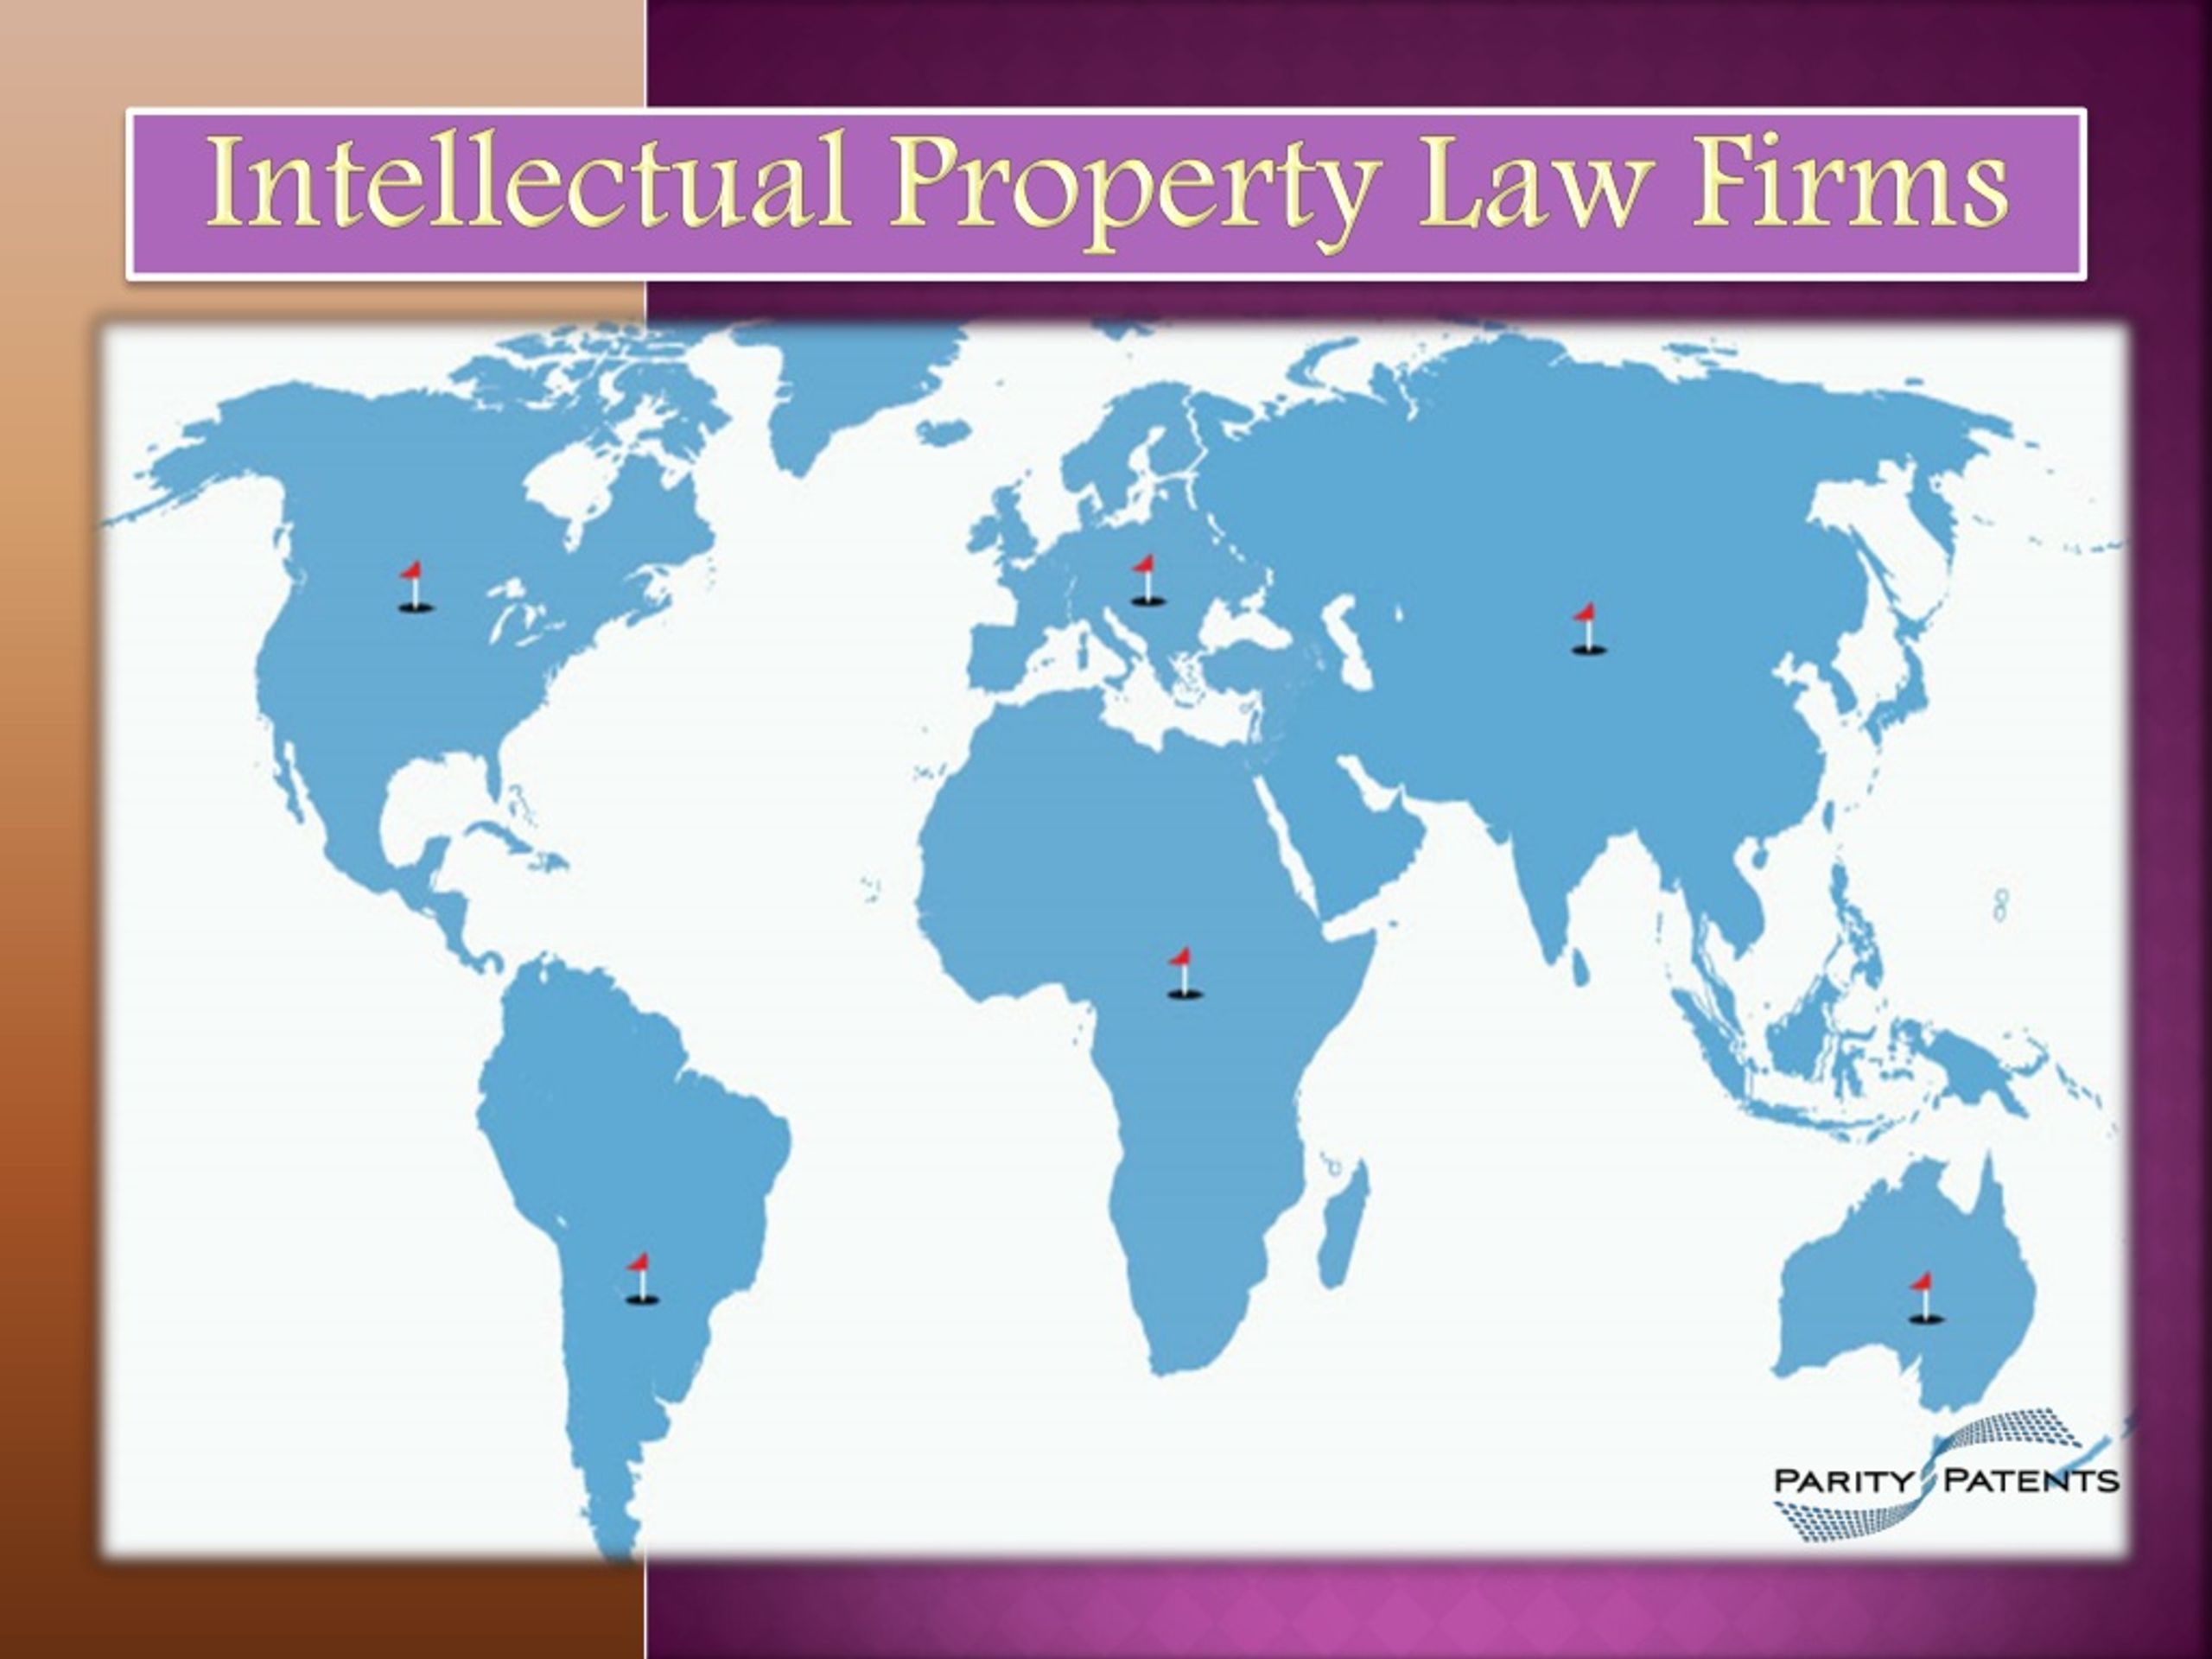 ip law firms